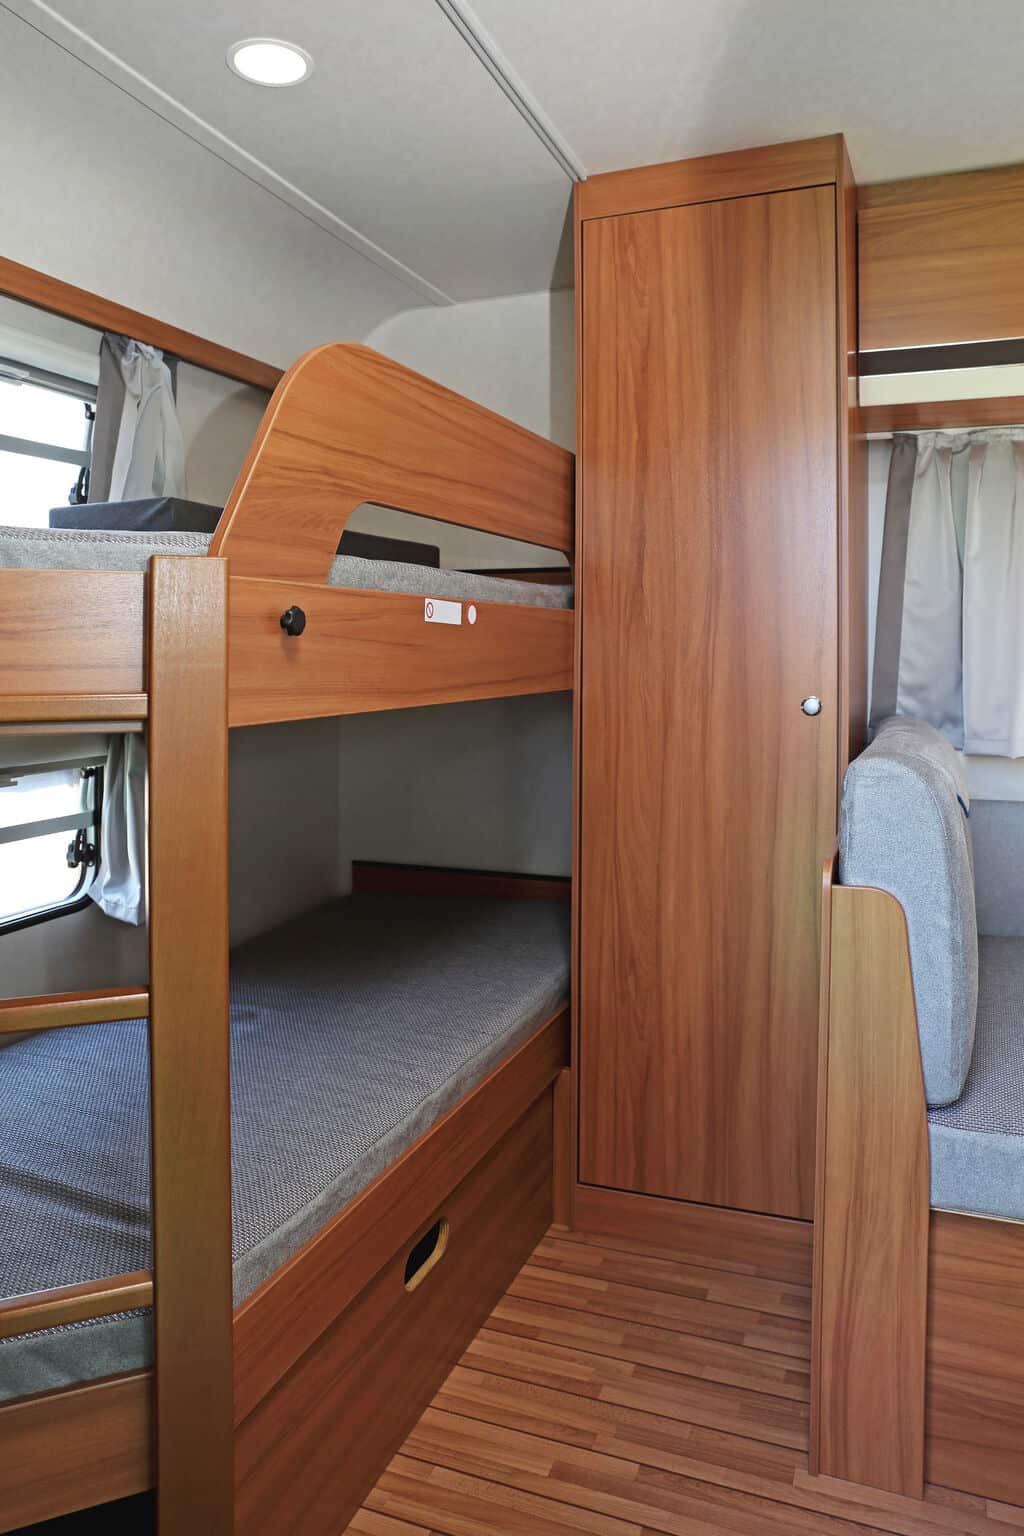 5 Travel Trailers With Quad Bunkhouse, Rv Wall Mounted Bunk Beds